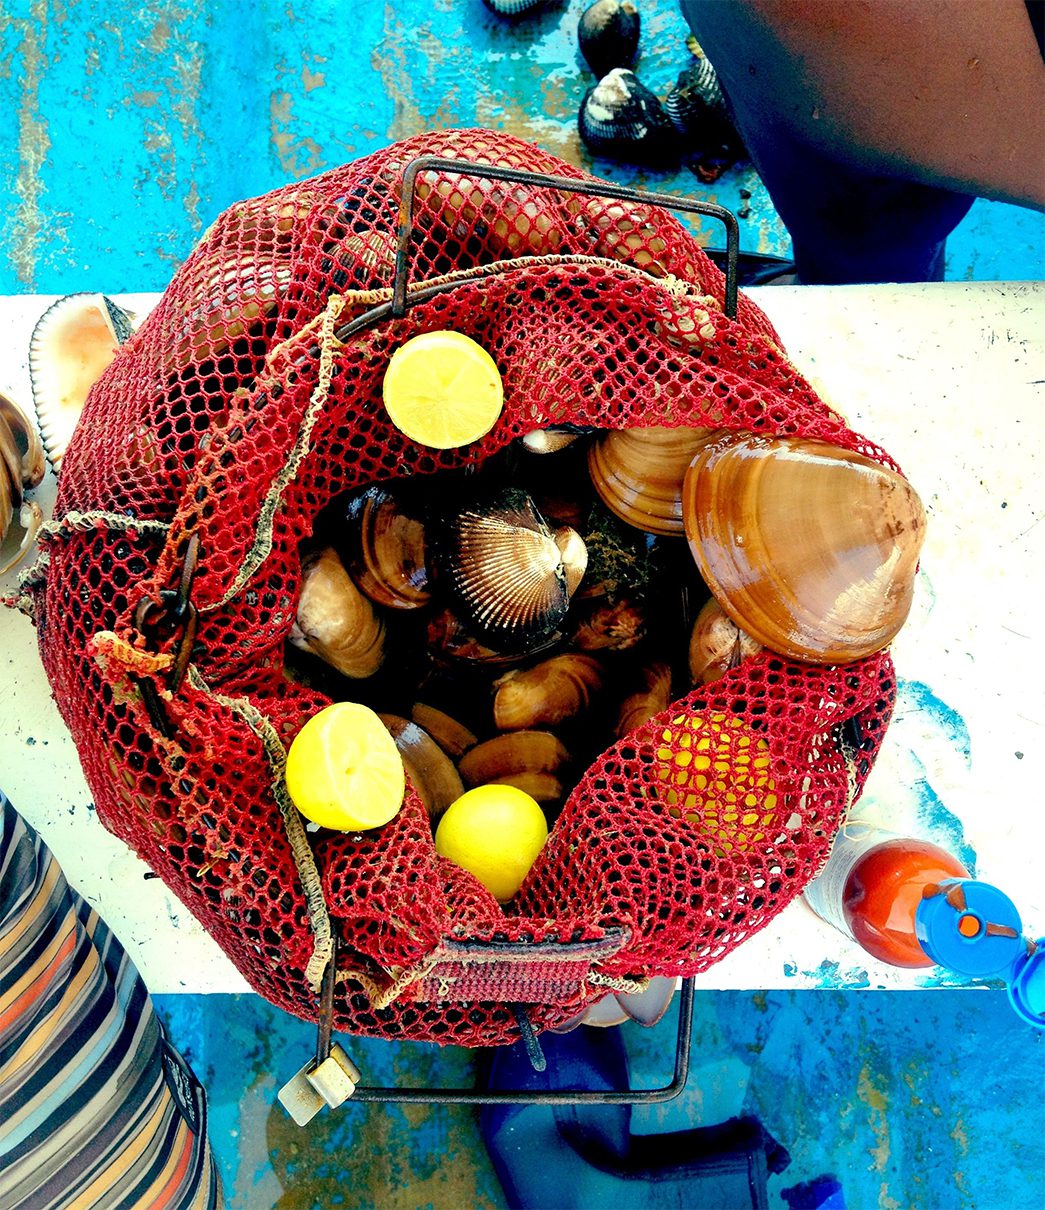 Almejas pata de mula literally translates to “clams mule’s foot,” and figuratively means that these clams are so rich you feel like you’ve been kicked in the chest by a mule when you eat them